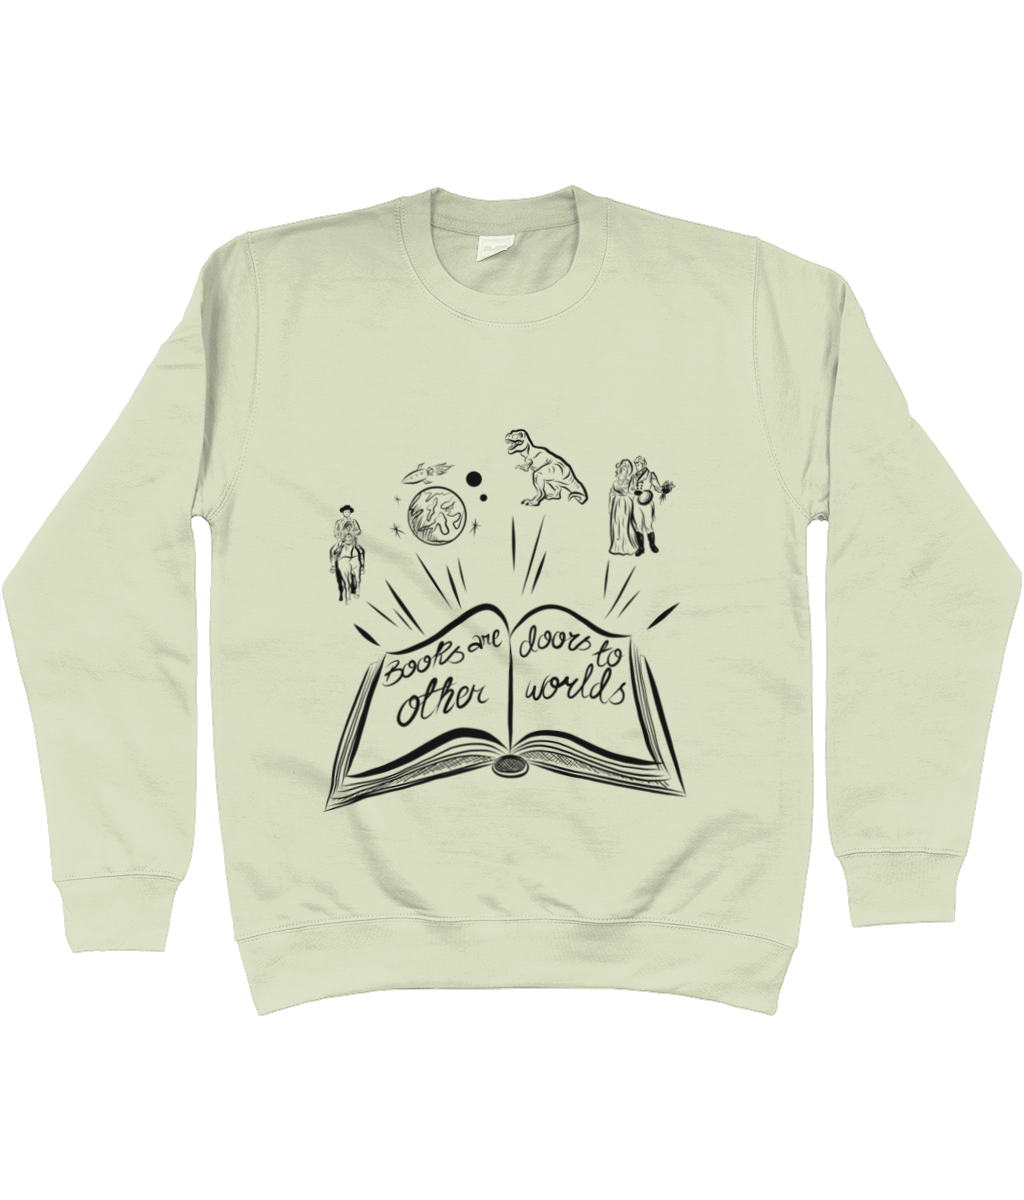 'Books are doors to other worlds' jumper - adults'